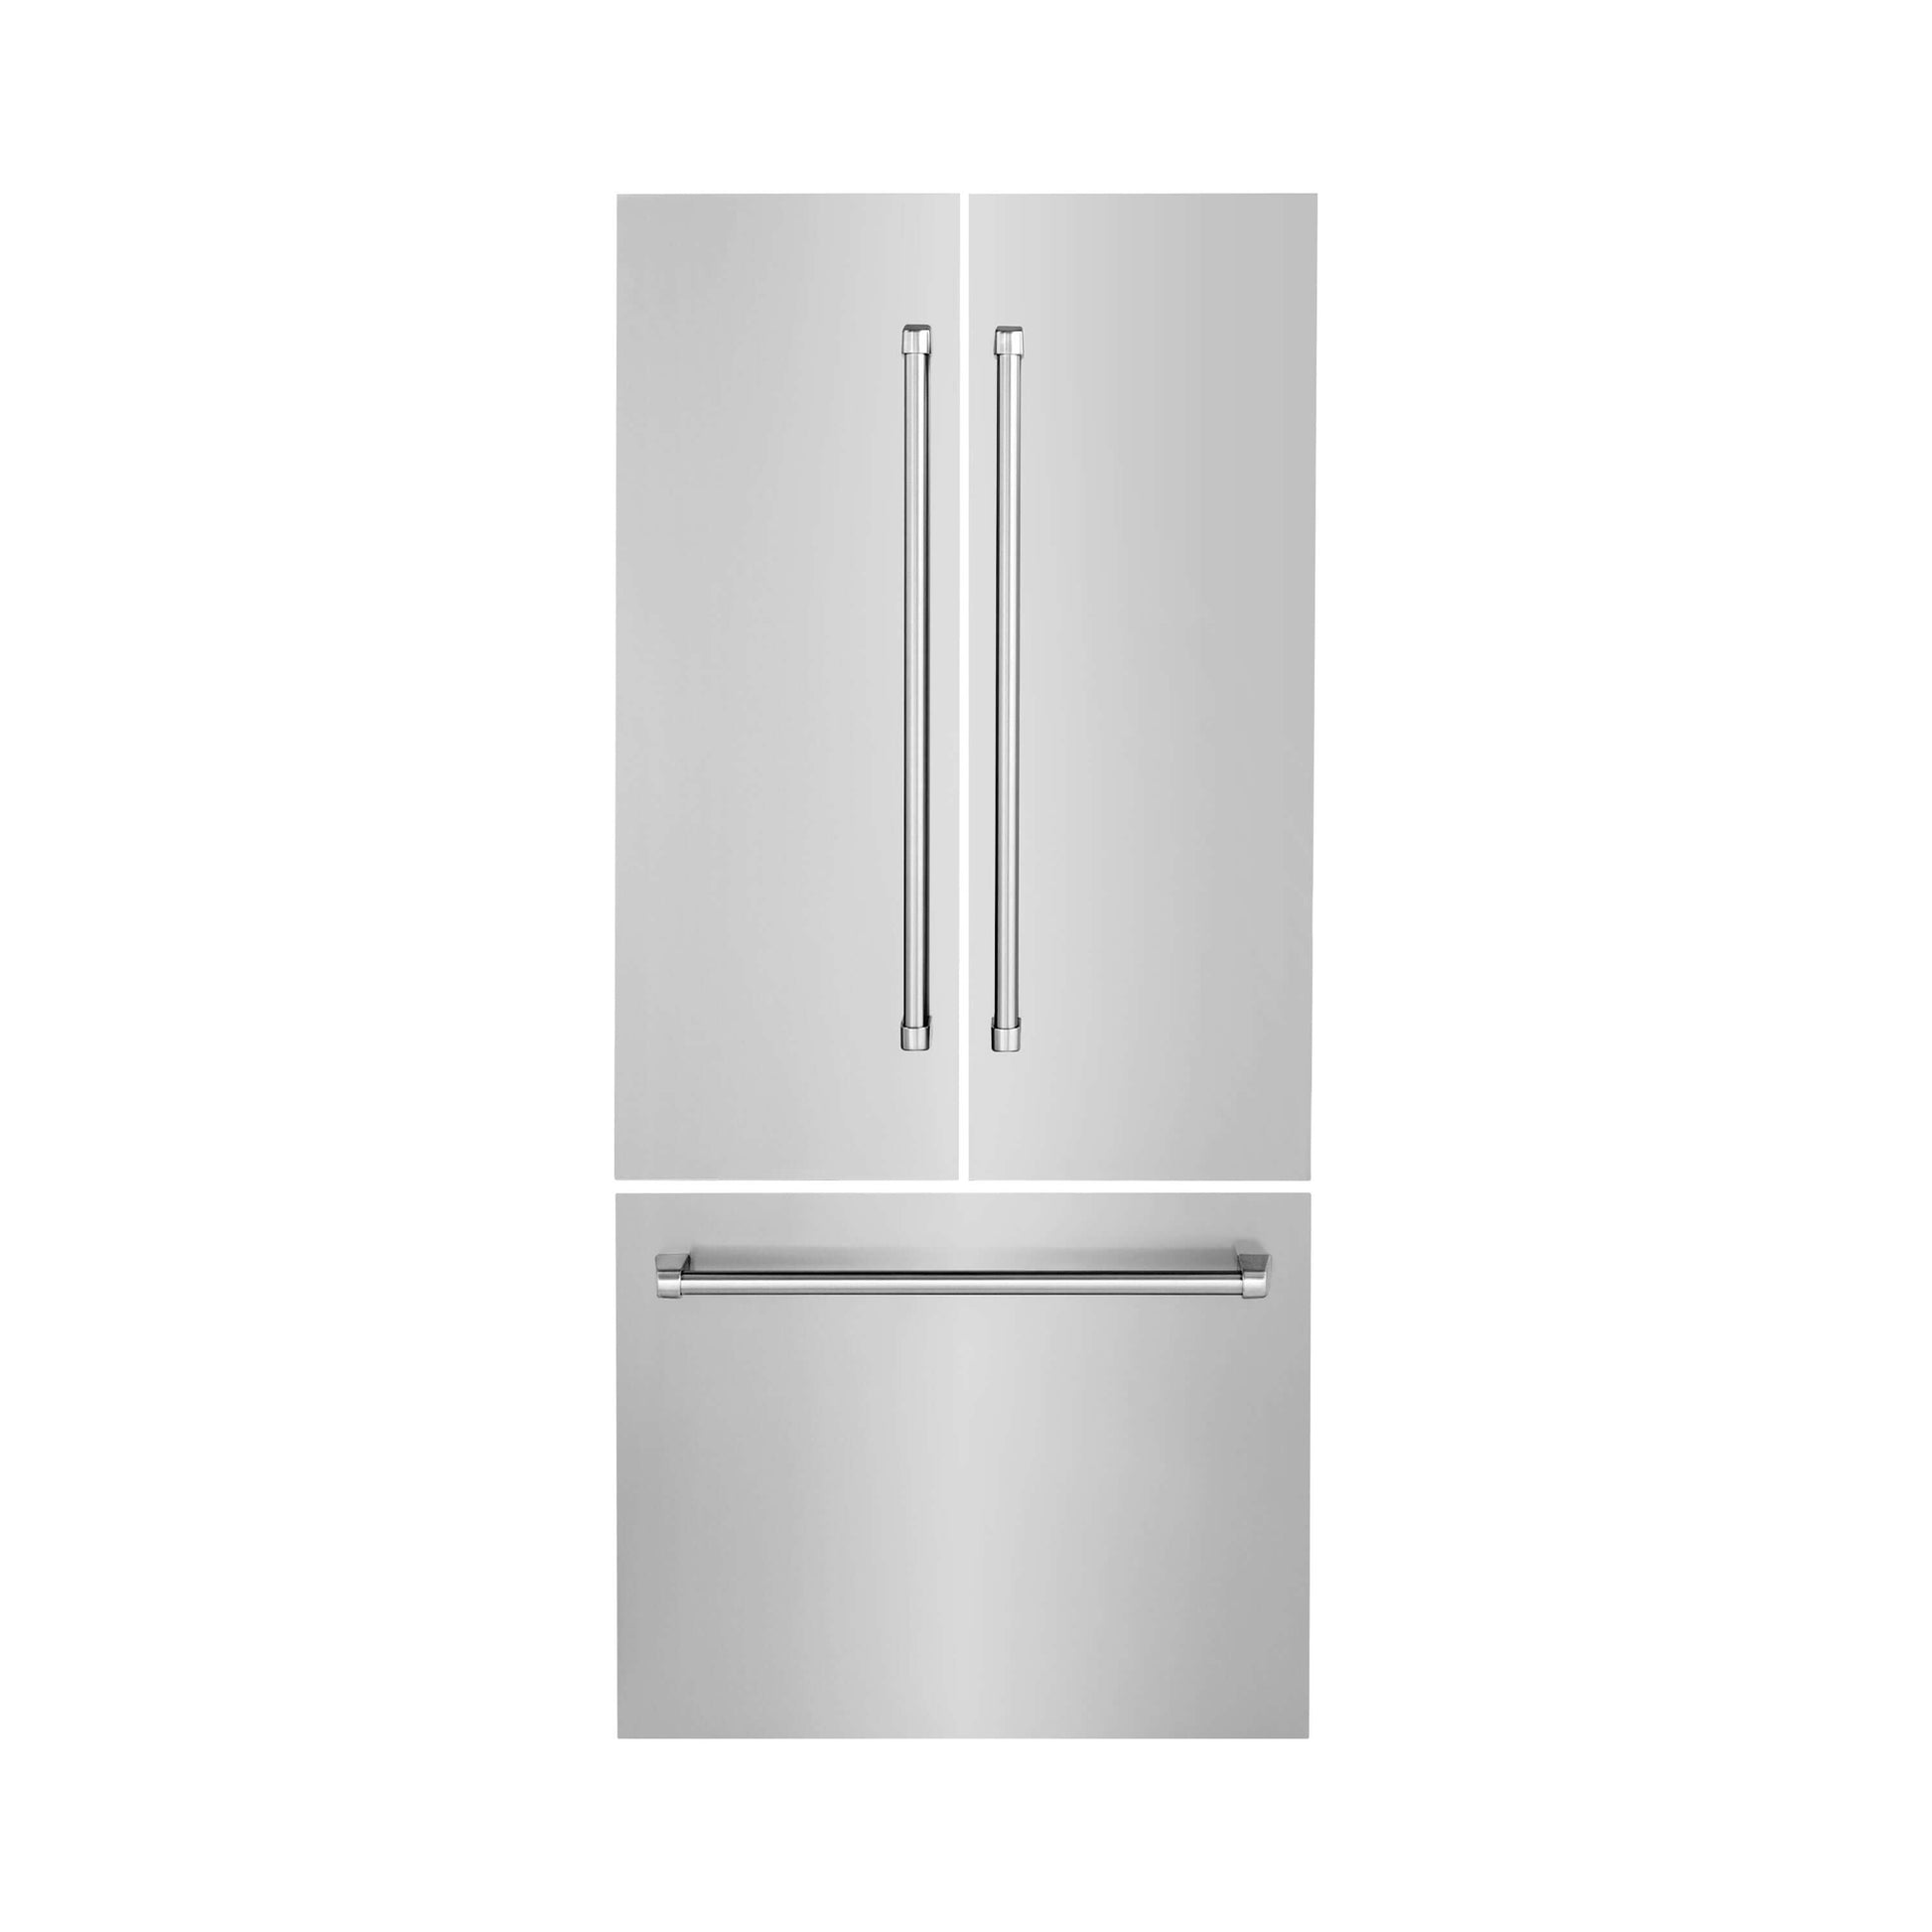 Panels & Handles Only - ZLINE 36" Refrigerator Panels in Stainless Steel